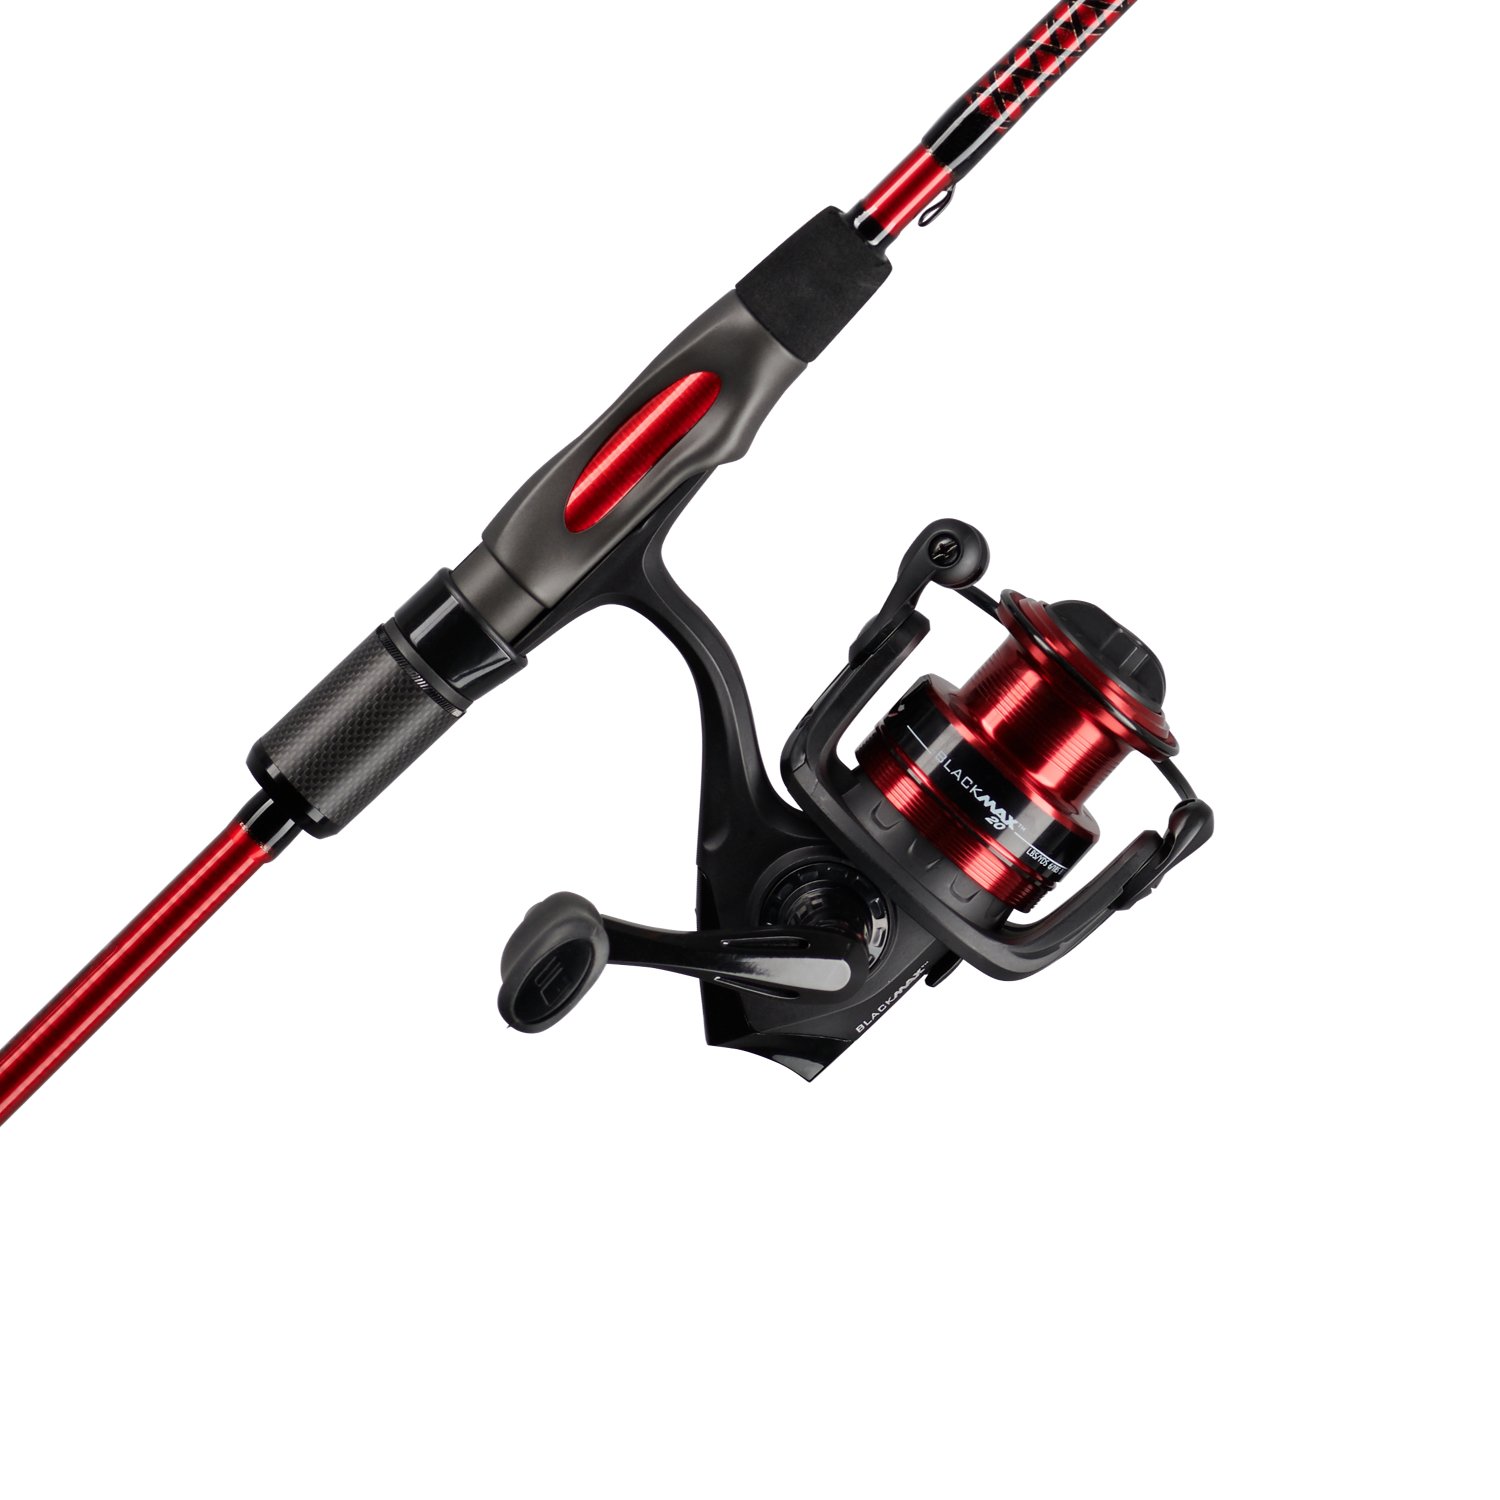 https://academy.scene7.com/is/image/academy//fishing-rod---reel-combos/ugly-stik-carbon-spinning-combo-uscbsp702m/30cbo-/d319ed1a-1c9f-400f-80b8-e23019ee2ac6